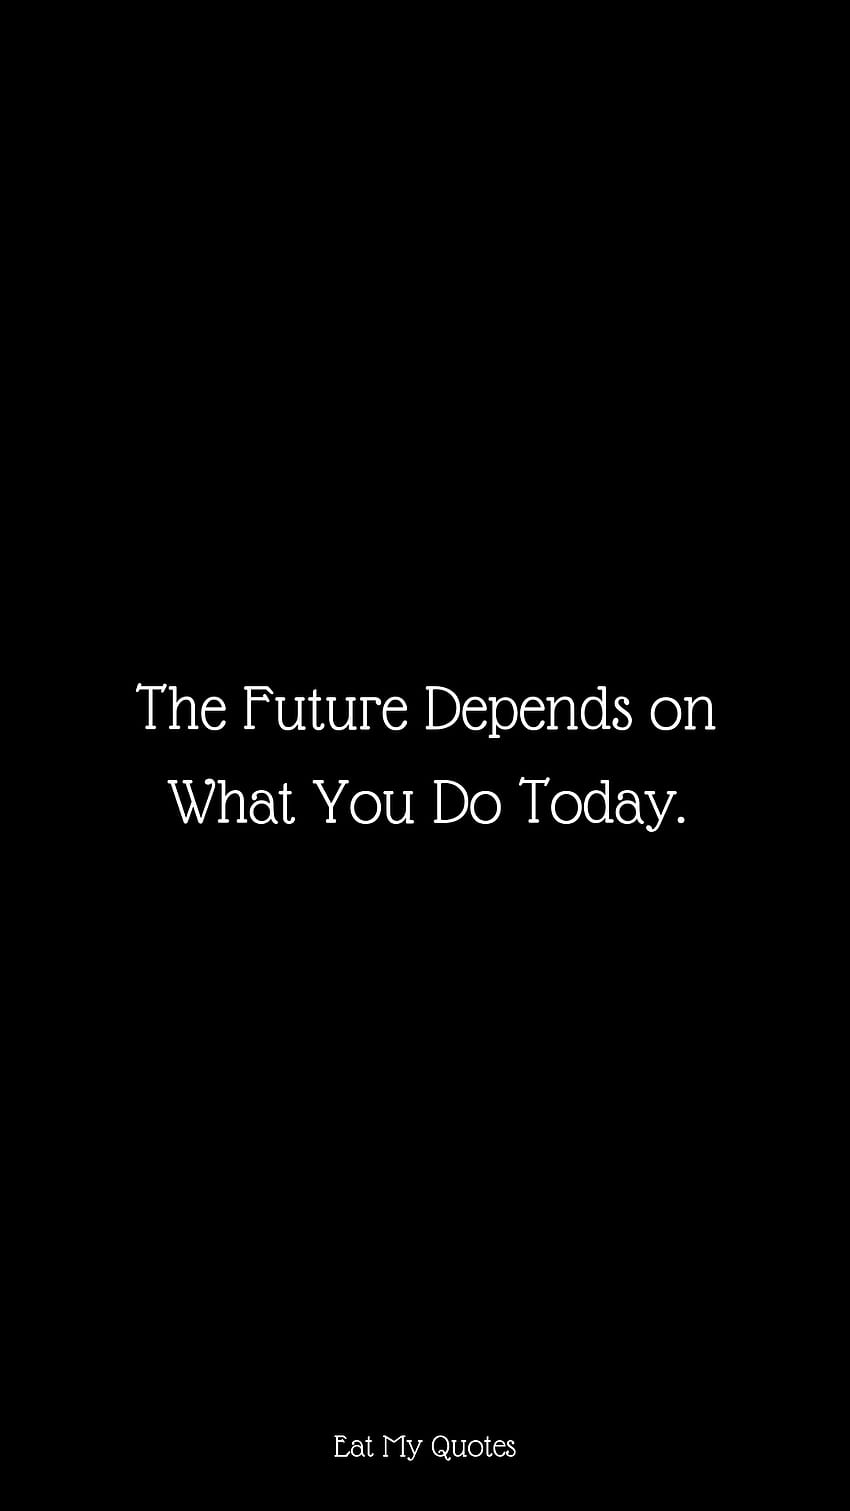 The Future Depends on What You Do Today., my future HD phone wallpaper